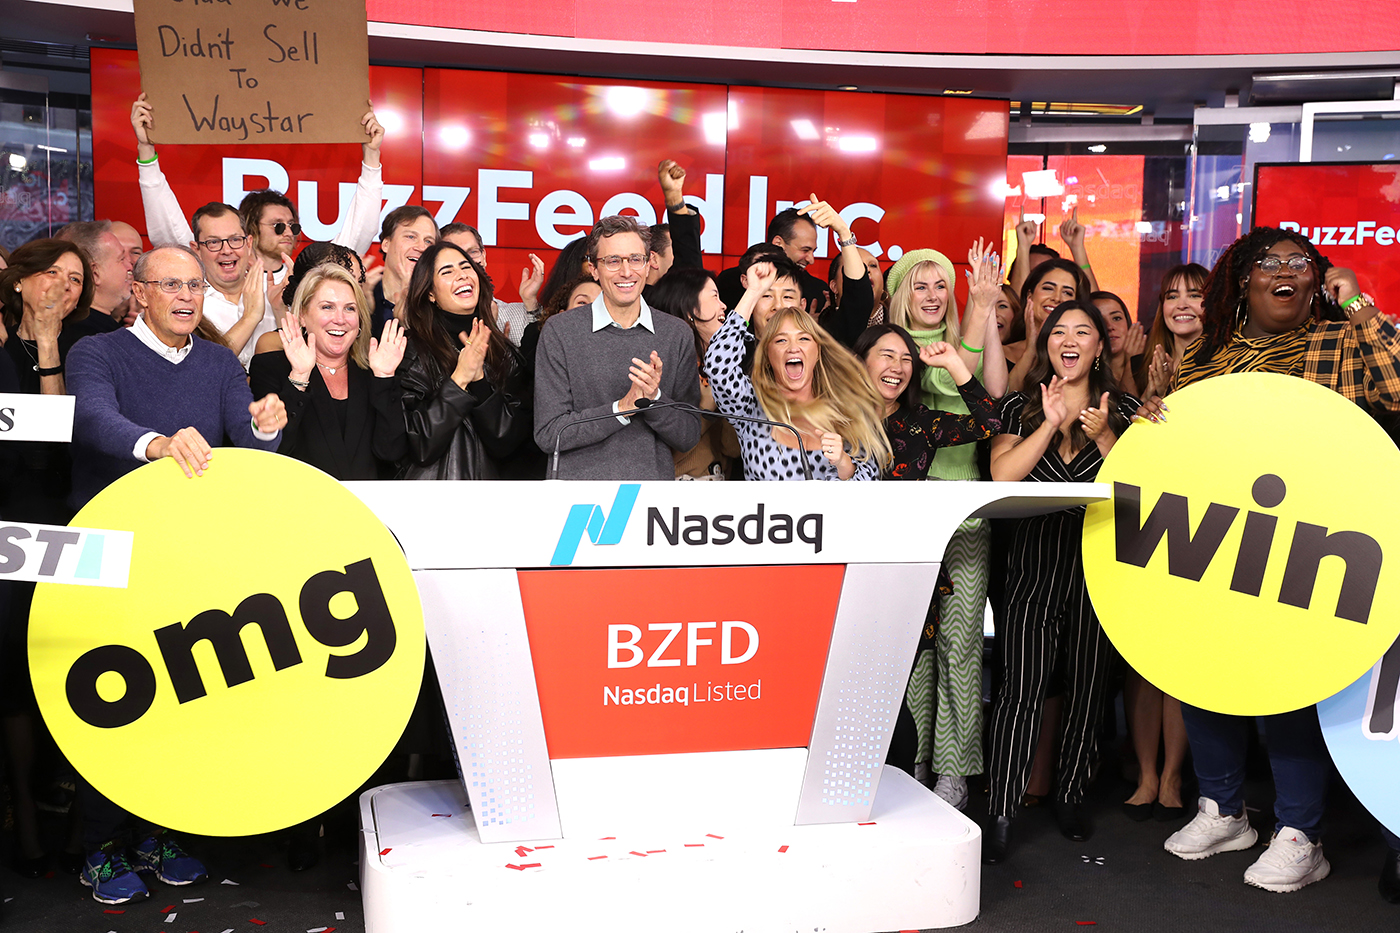 Founder and CEO of BuzzFeed Jonah H. Peretti celebrates ringing the bell with team members during BuzzFeed Inc.'s Listing Day at Nasdaq in New York City.